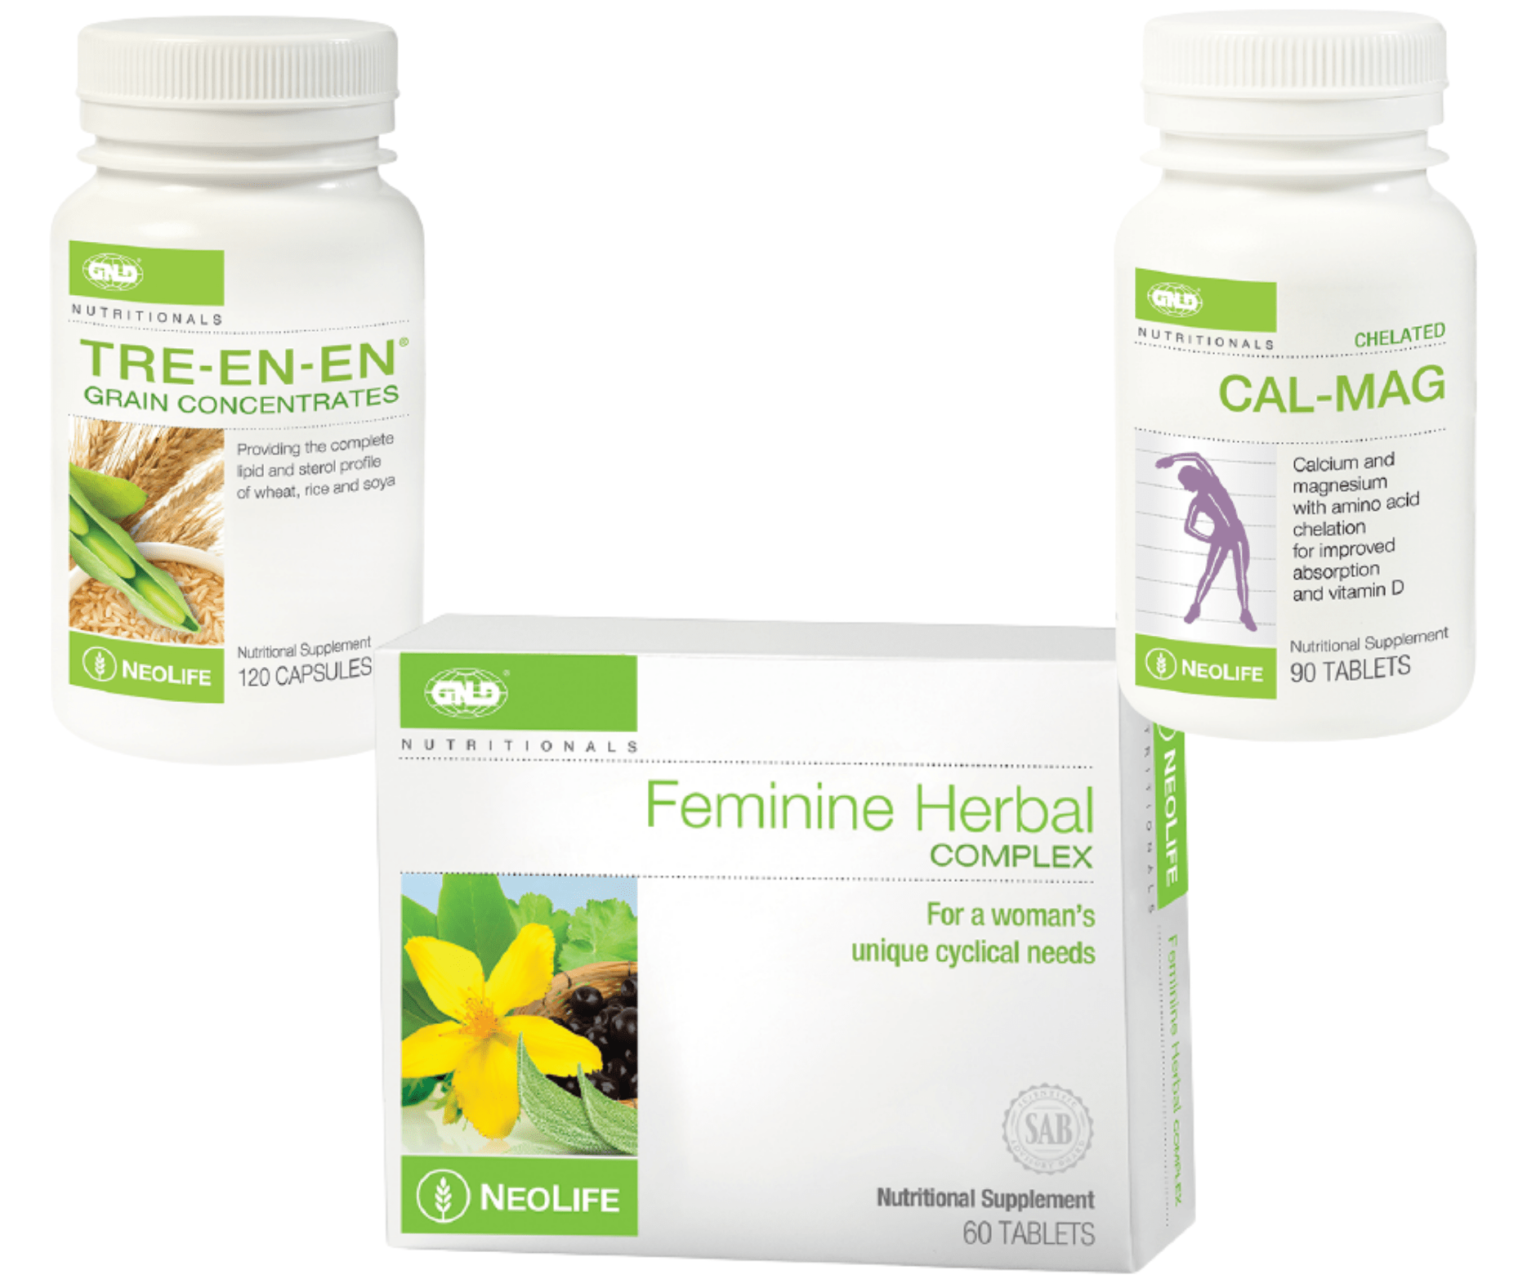 Gnld Products For Female Infertility Gnld Neolife Products